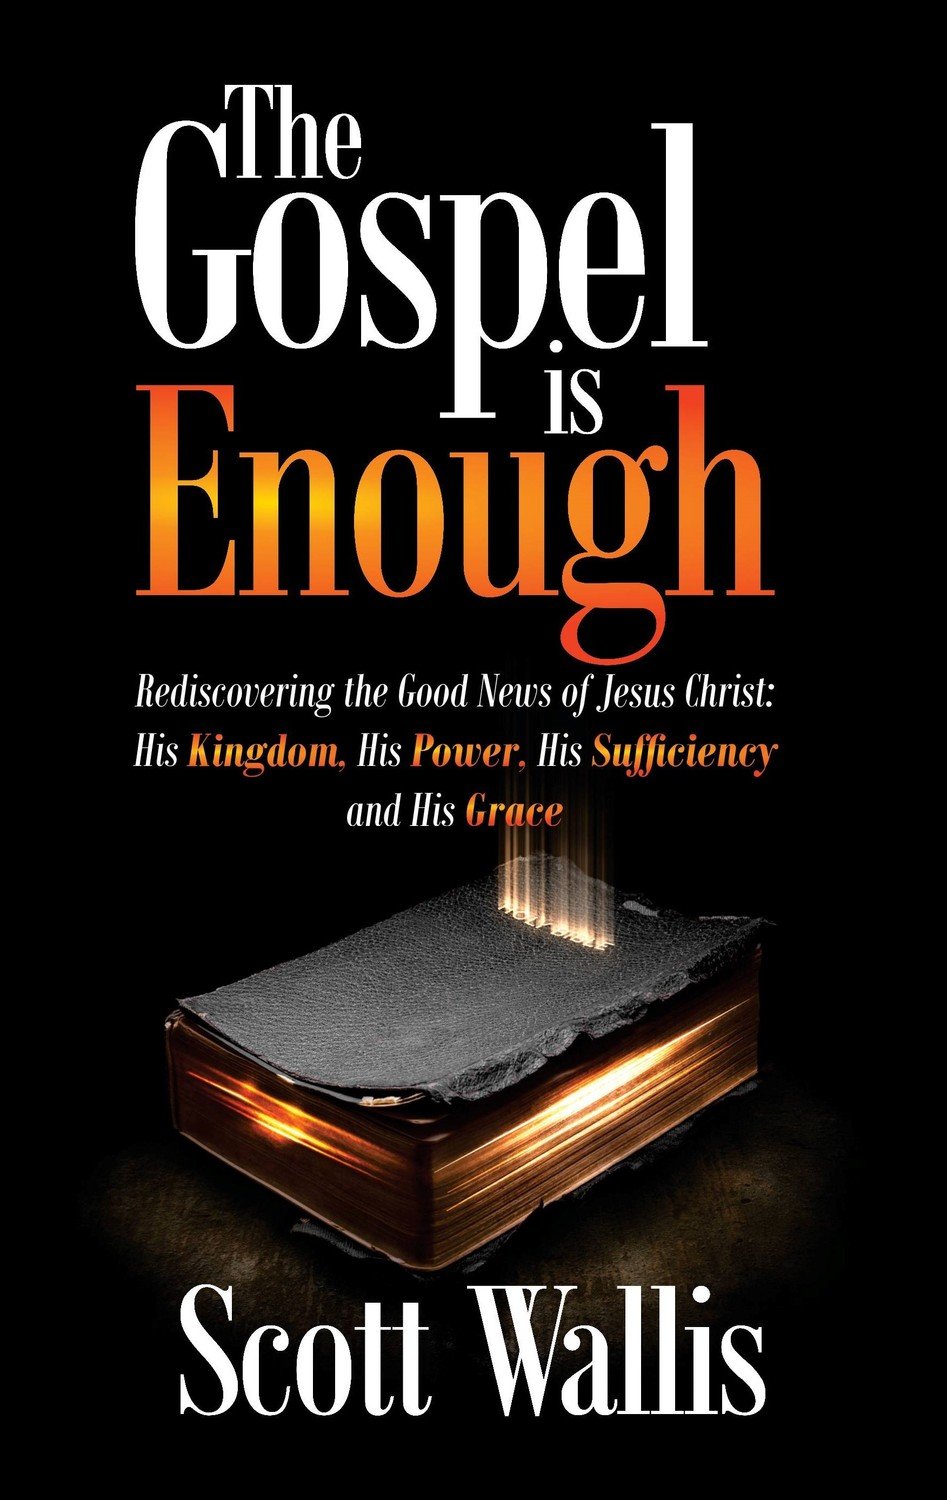 The Gospel is Enough: Rediscovering the Good News of Jesus Christ: His Kingdom, His Power, His Sufficiency and His Grace